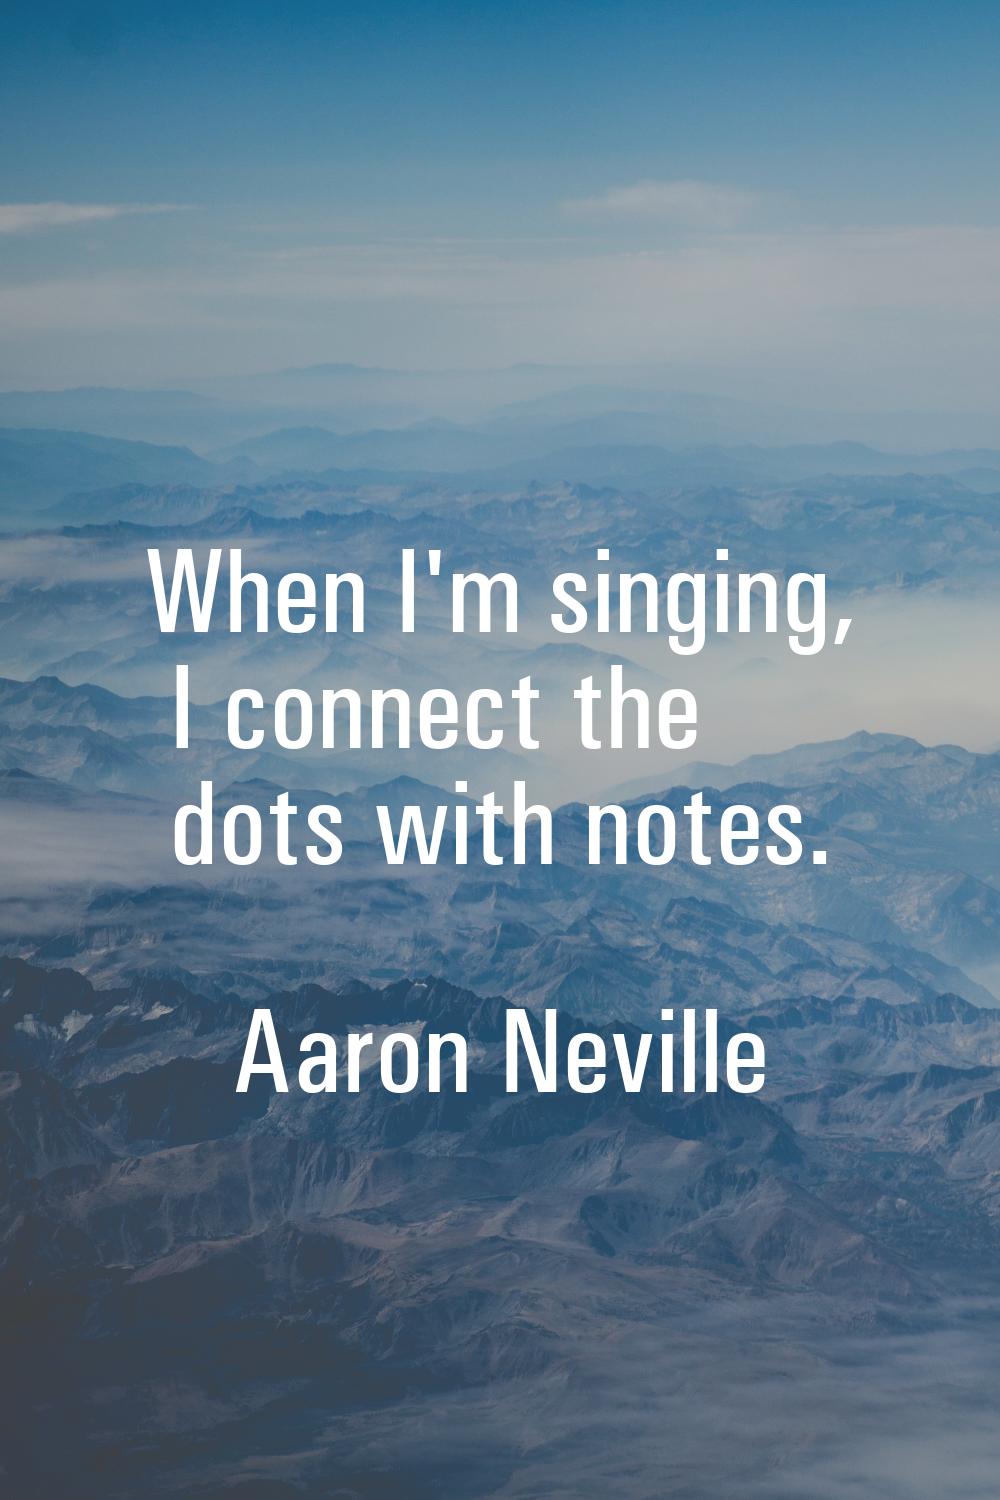 When I'm singing, I connect the dots with notes.